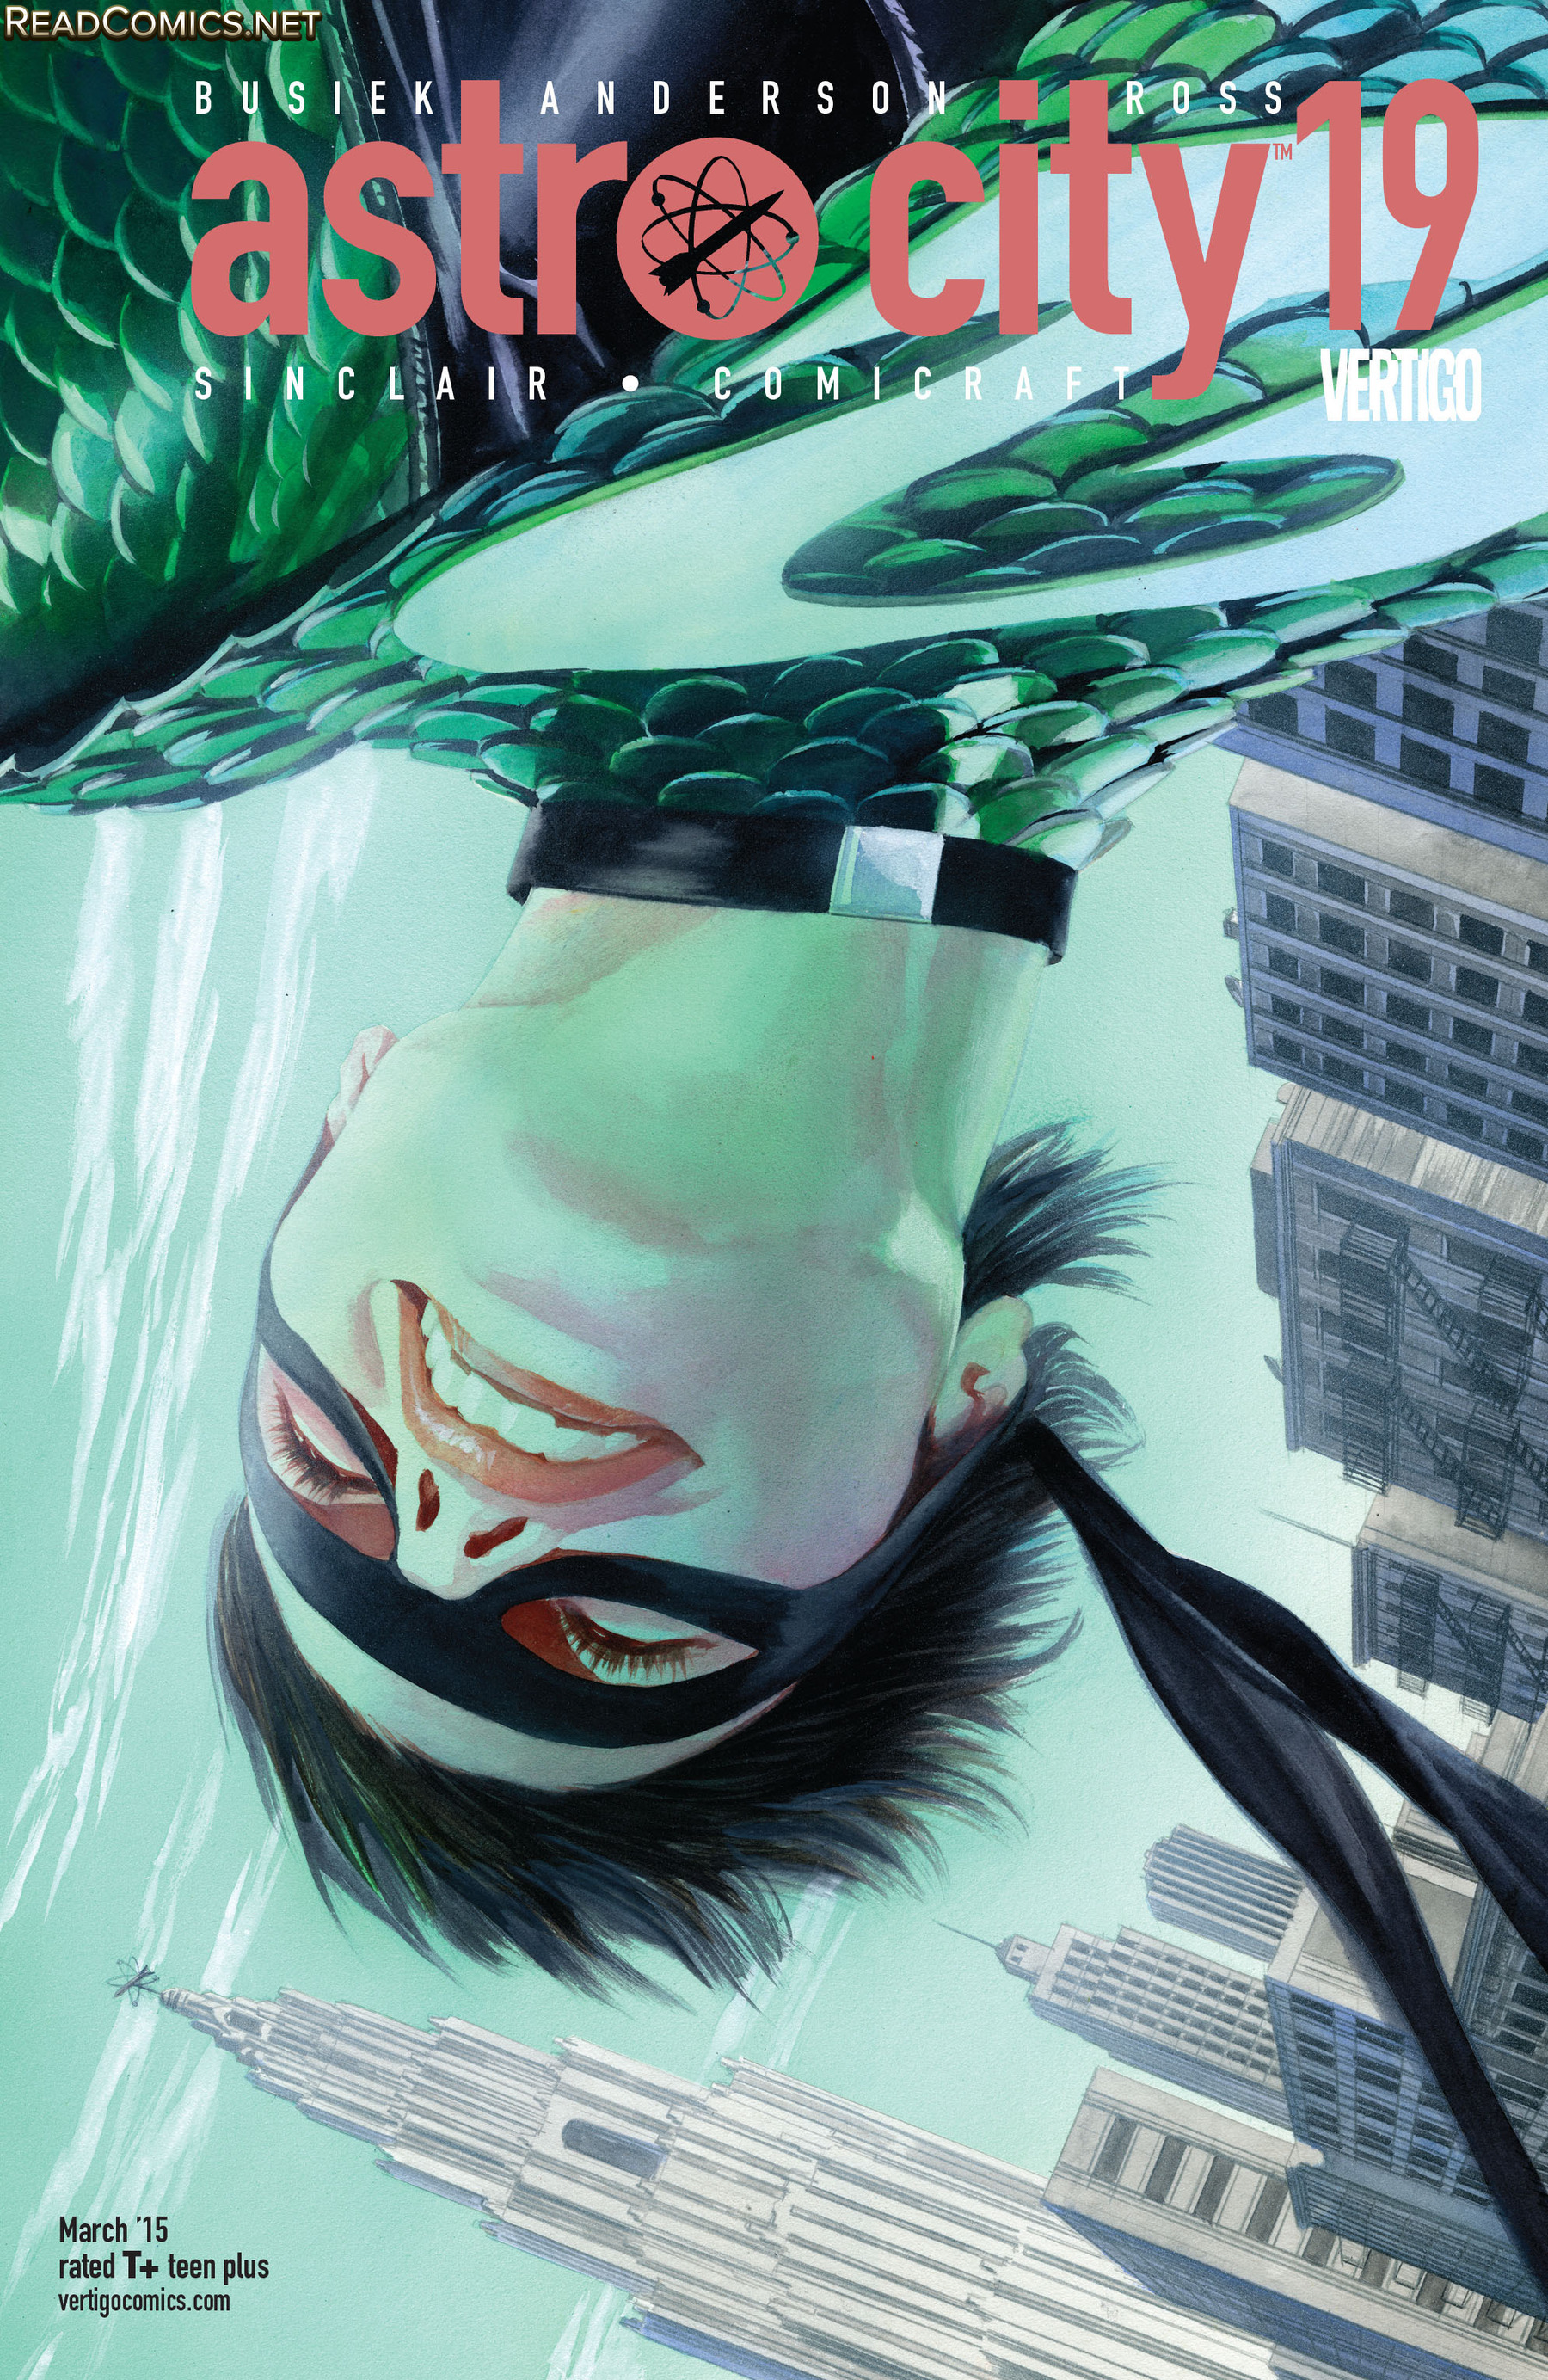 Astro City (2013-): Chapter 19 - Page 1